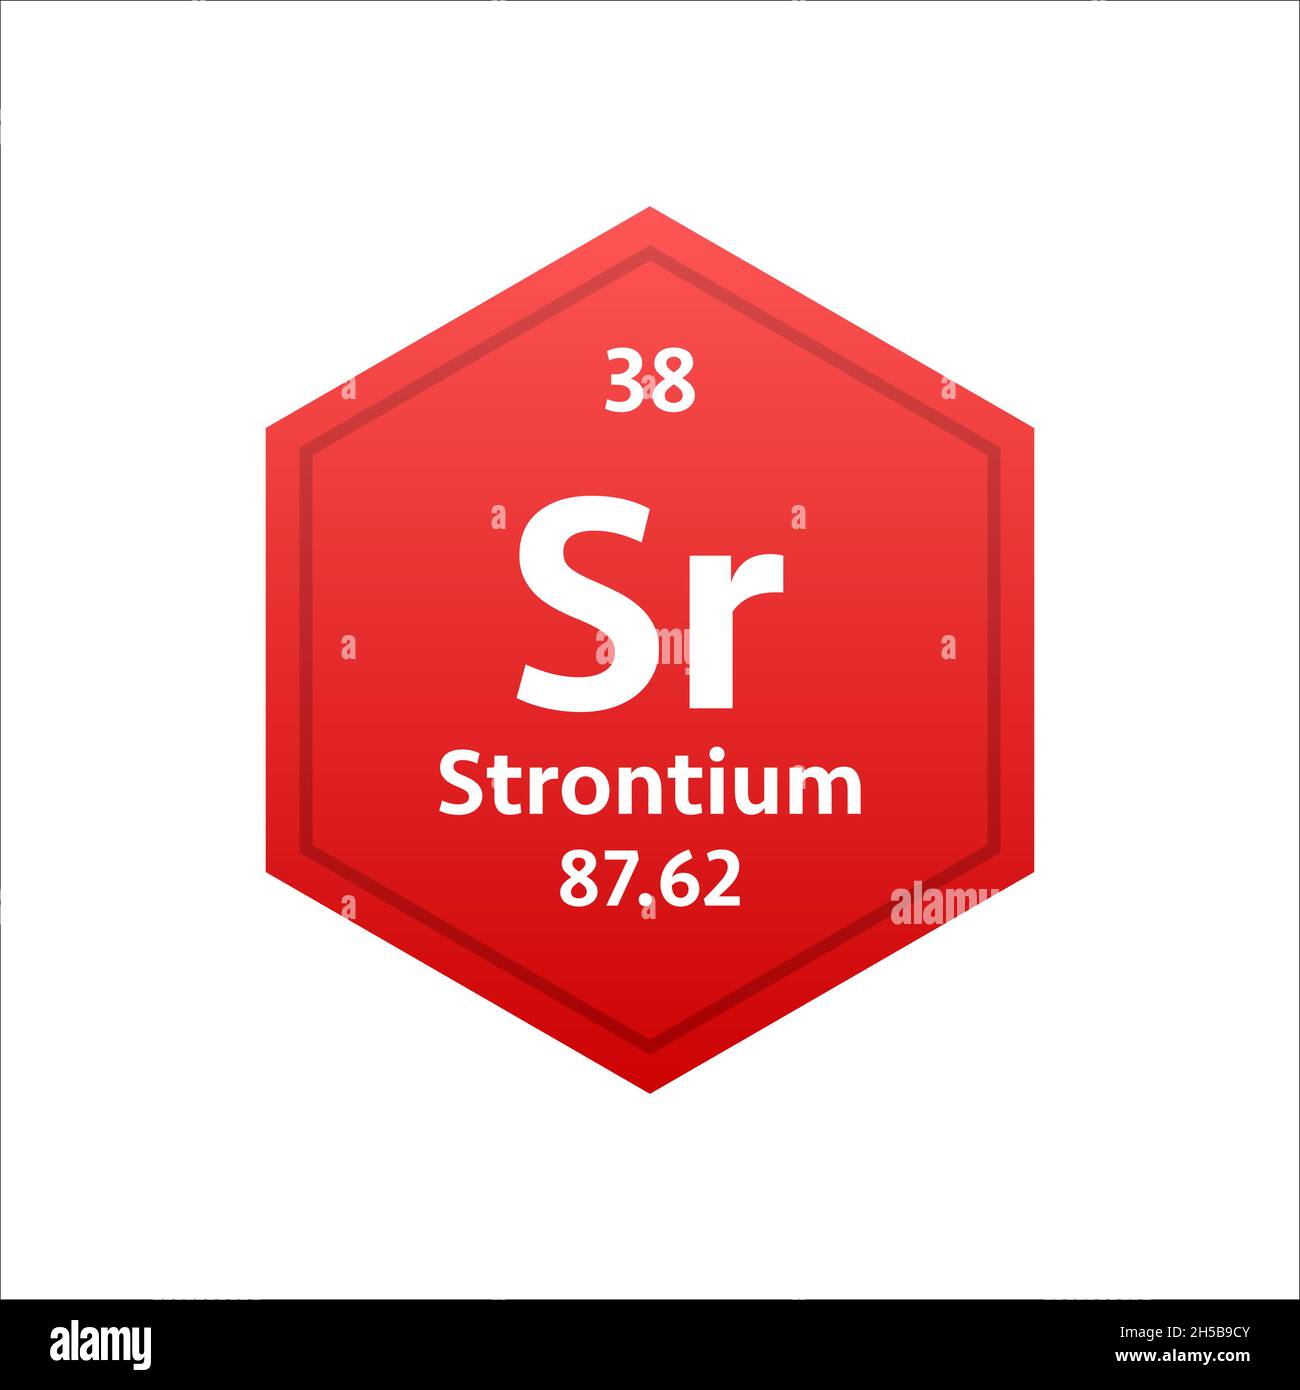 Strontium symbol. Chemical element of the periodic table. Vector stock illustration. Stock Vector